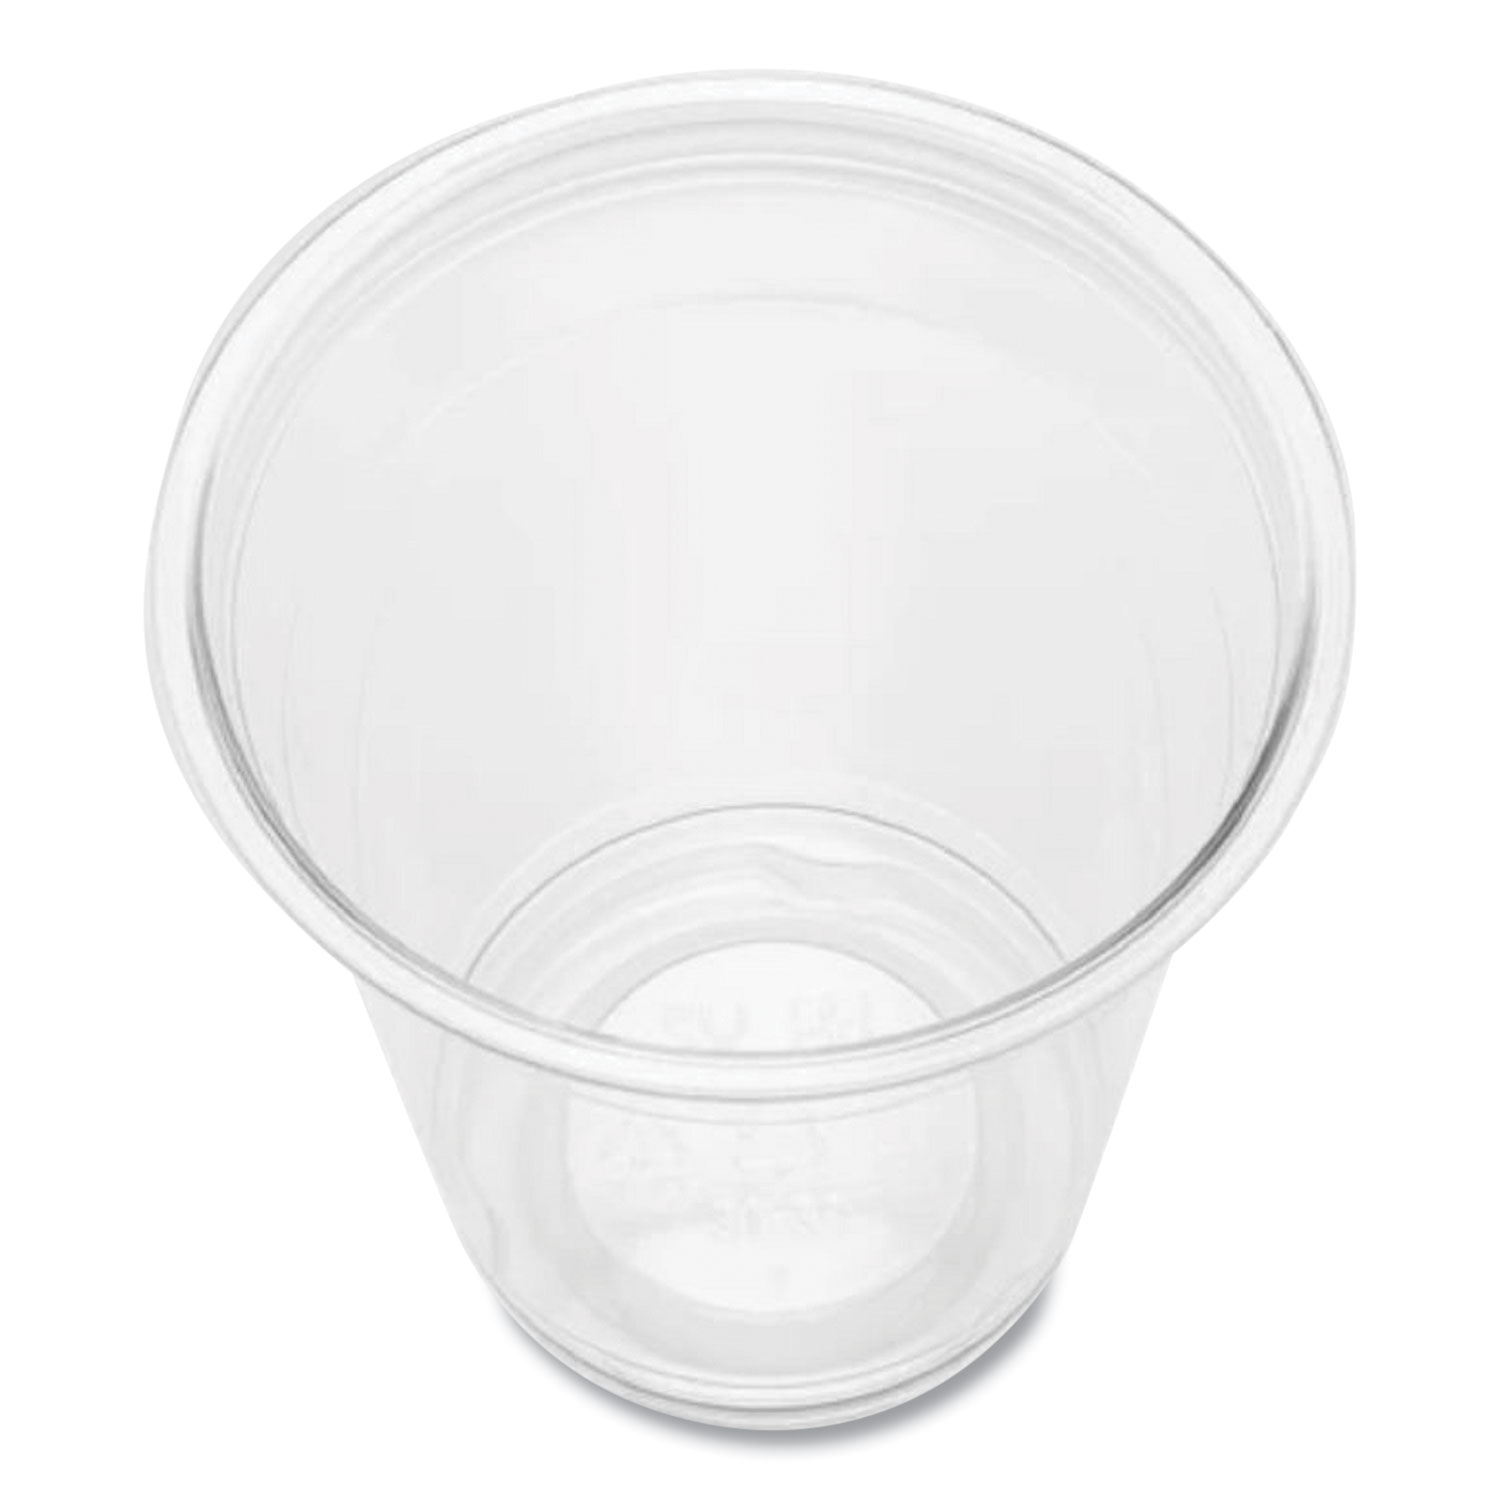 Shop Plastic Cups - 9oz PET Cold Cups (92mm) - 1,000 ct at Low Price